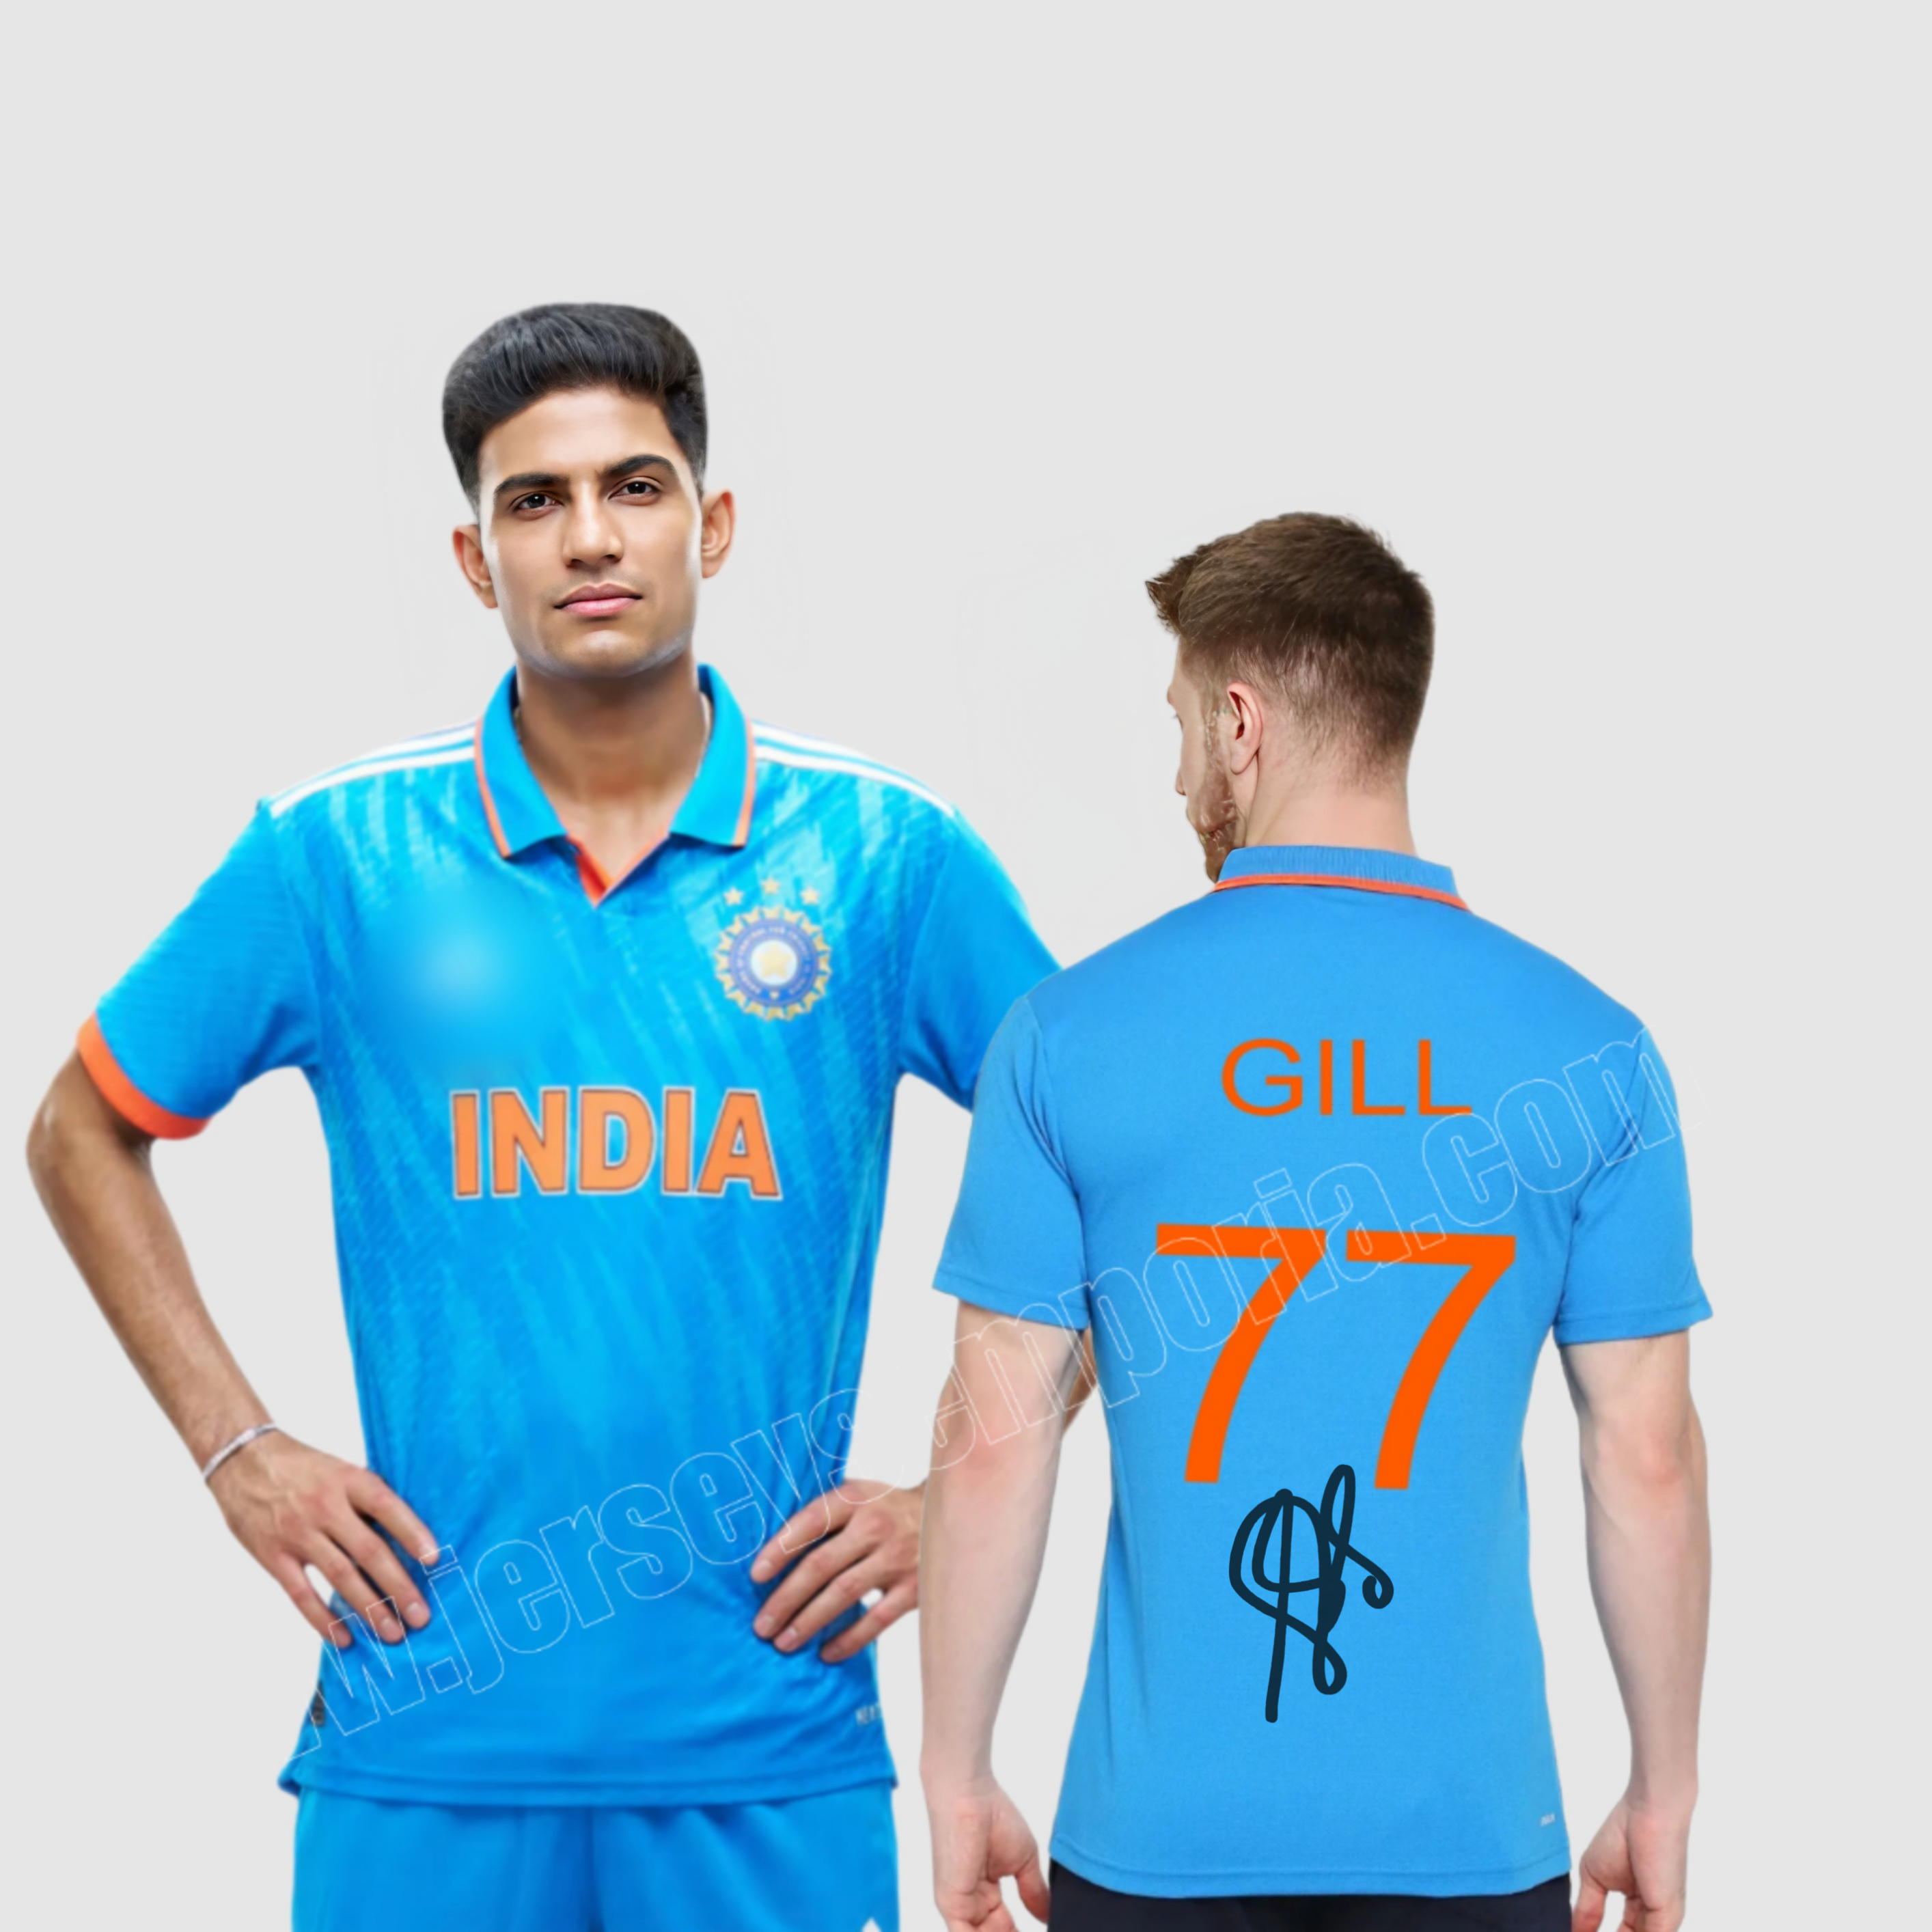 Adidas Launches India Jersey For 2023 World Cup: All You Need To Know About  India's New Kit